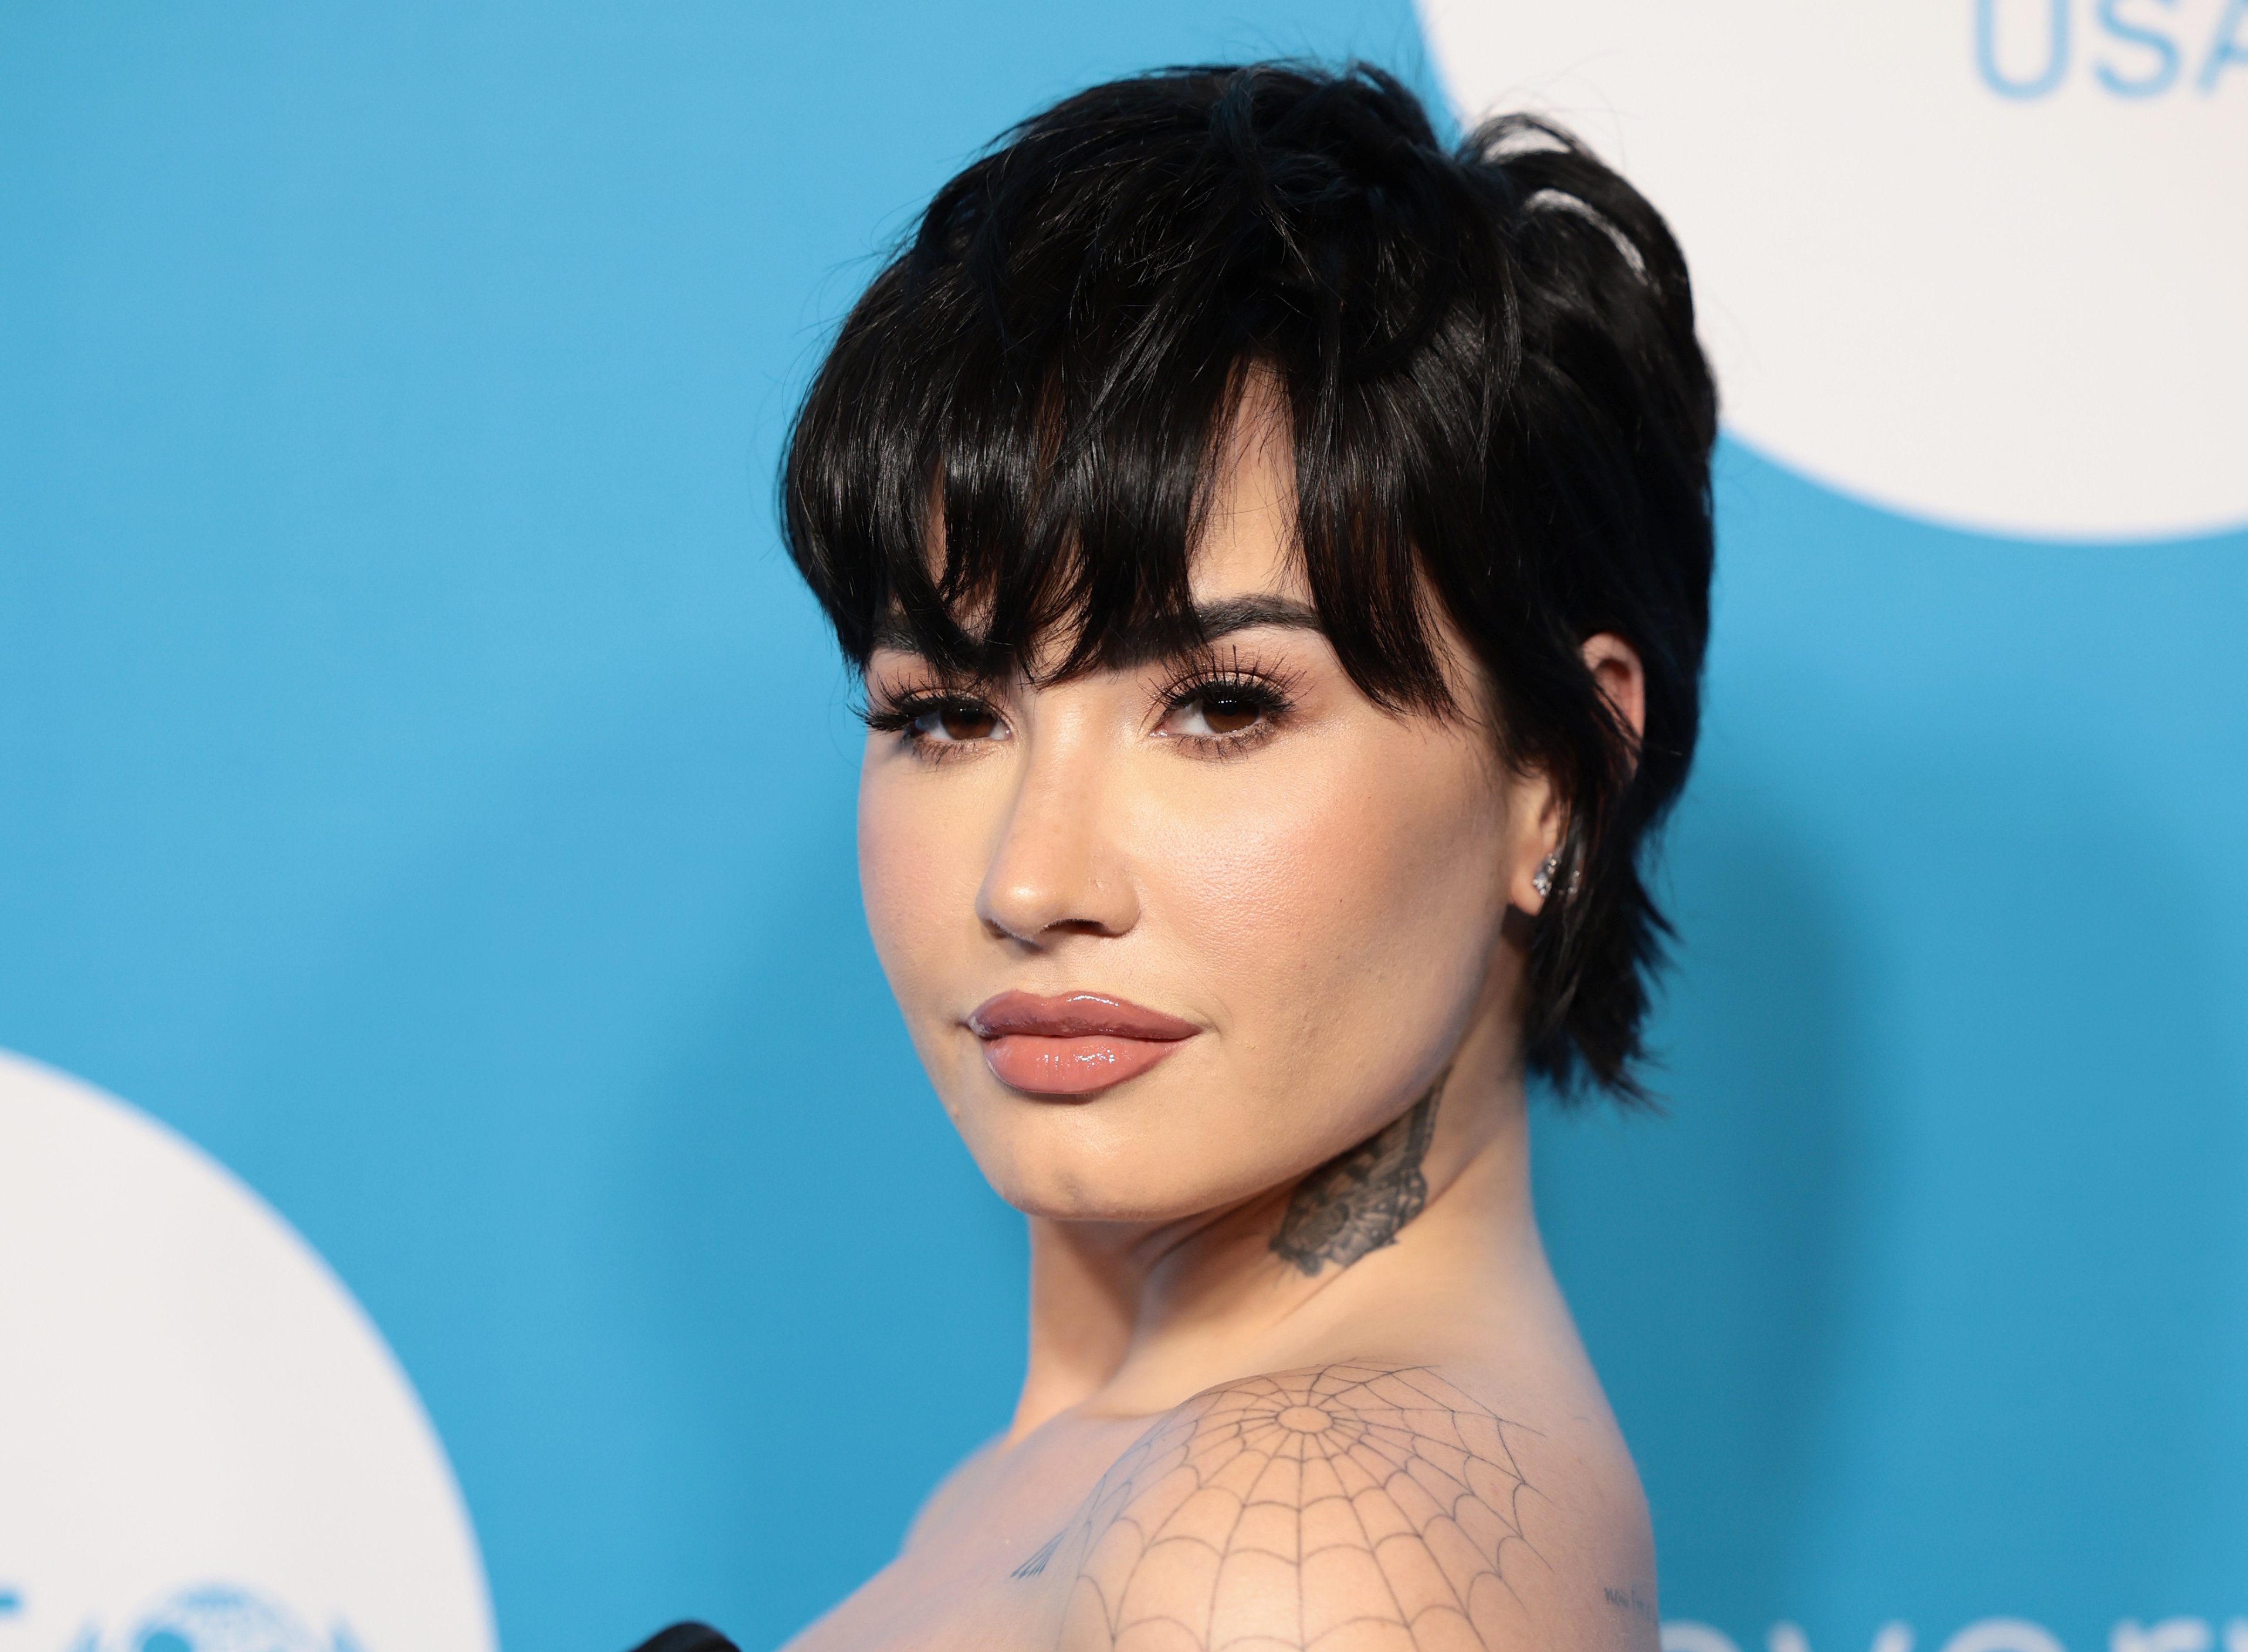 Demi Lovato at the 2022 UNICEF Gala in November 29, 2022, in New York City. | Source: Getty Images